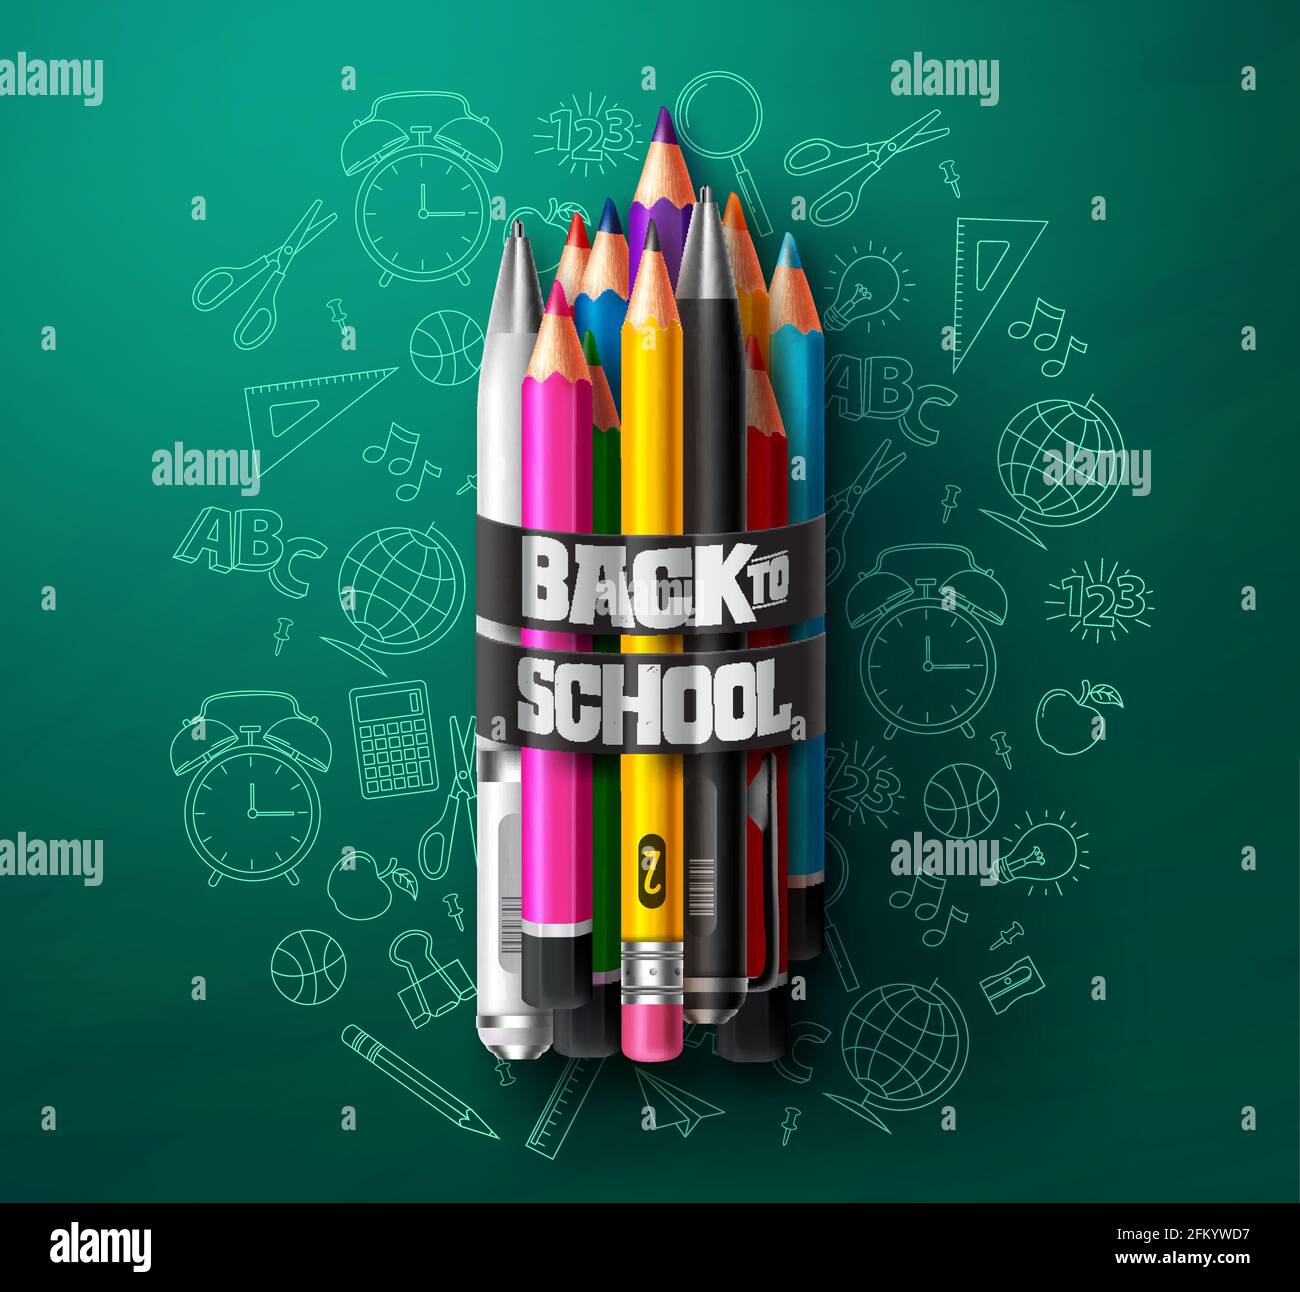 https://c8.alamy.com/comp/2FKYWD7/back-to-school-vector-concept-design-back-to-school-text-with-art-supplies-in-hand-drawn-background-with-colorful-pencils-in-green-background-2FKYWD7.jpg